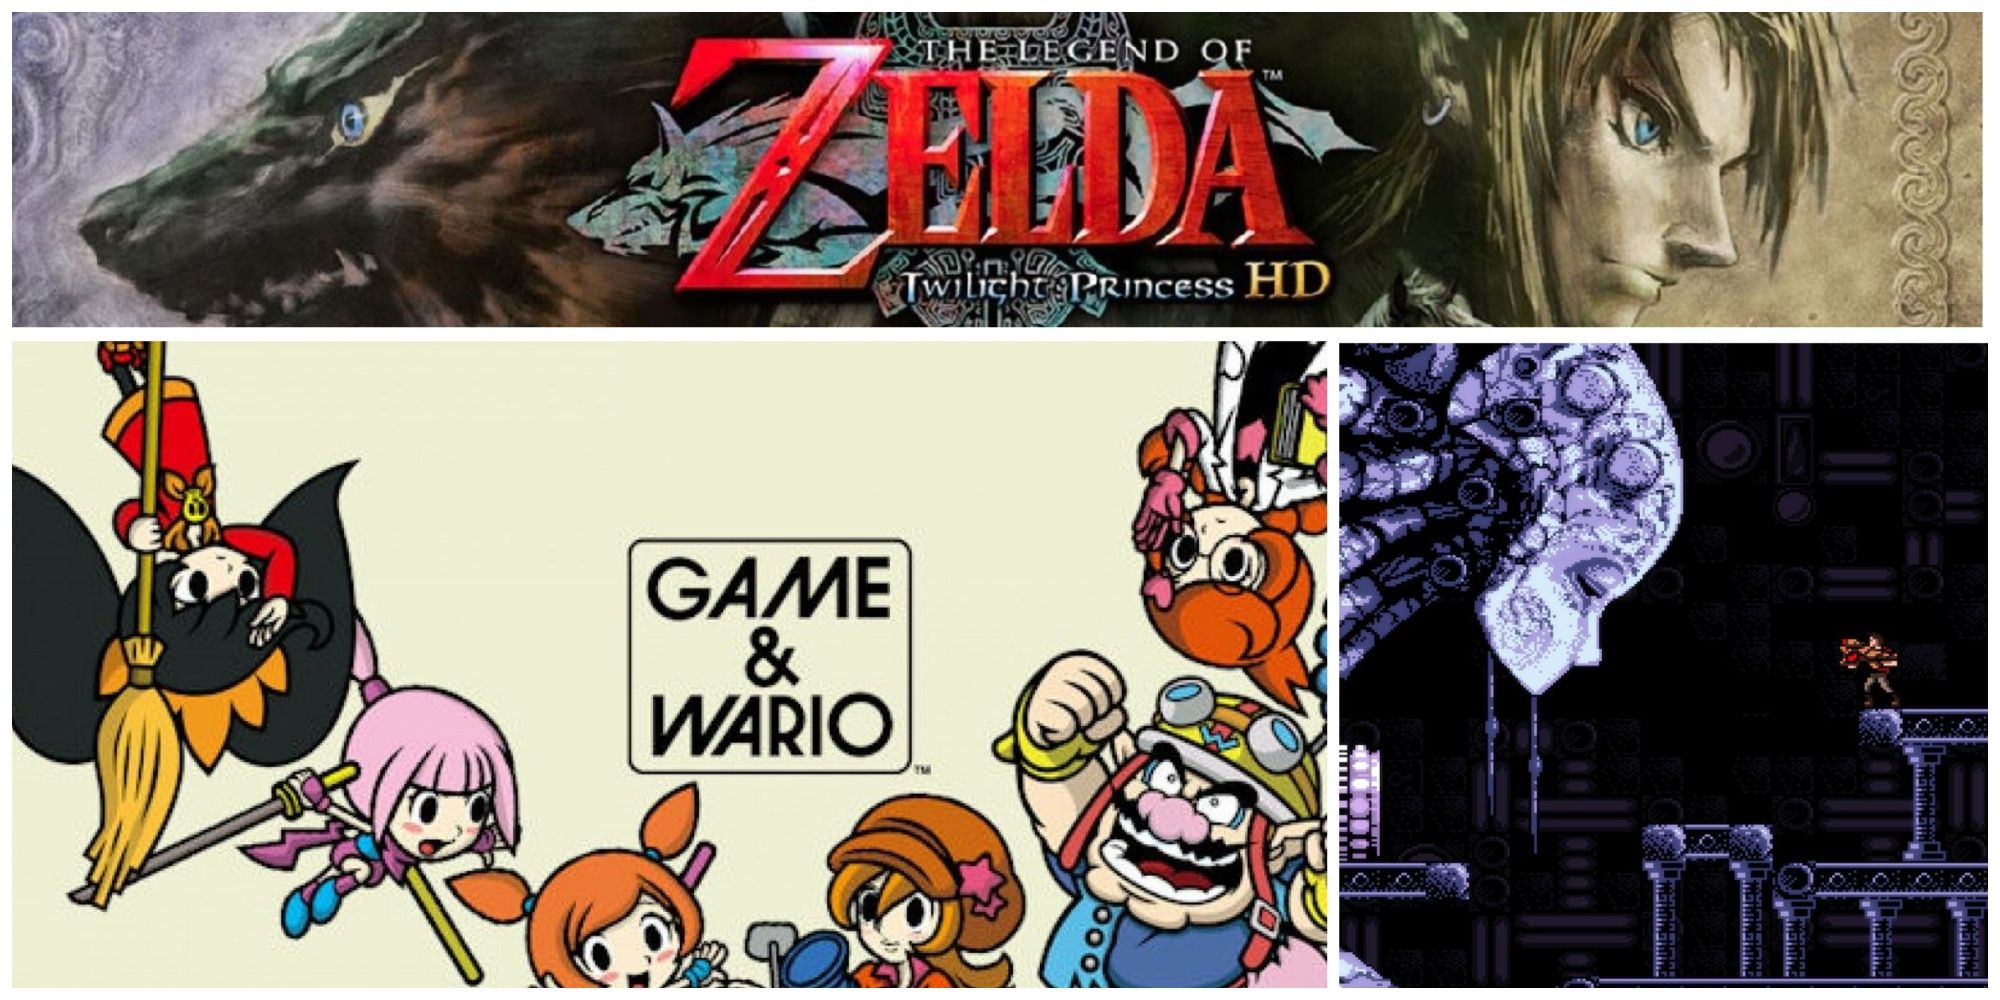 Top: The Legend of Zelda Twilight Princess banner bordered by wolf Link (left) and human Link (right). Bottom-left: The cast of Game & Wario. Bottom-right: A large cyborg head looking down at a human in Axiom Verge.